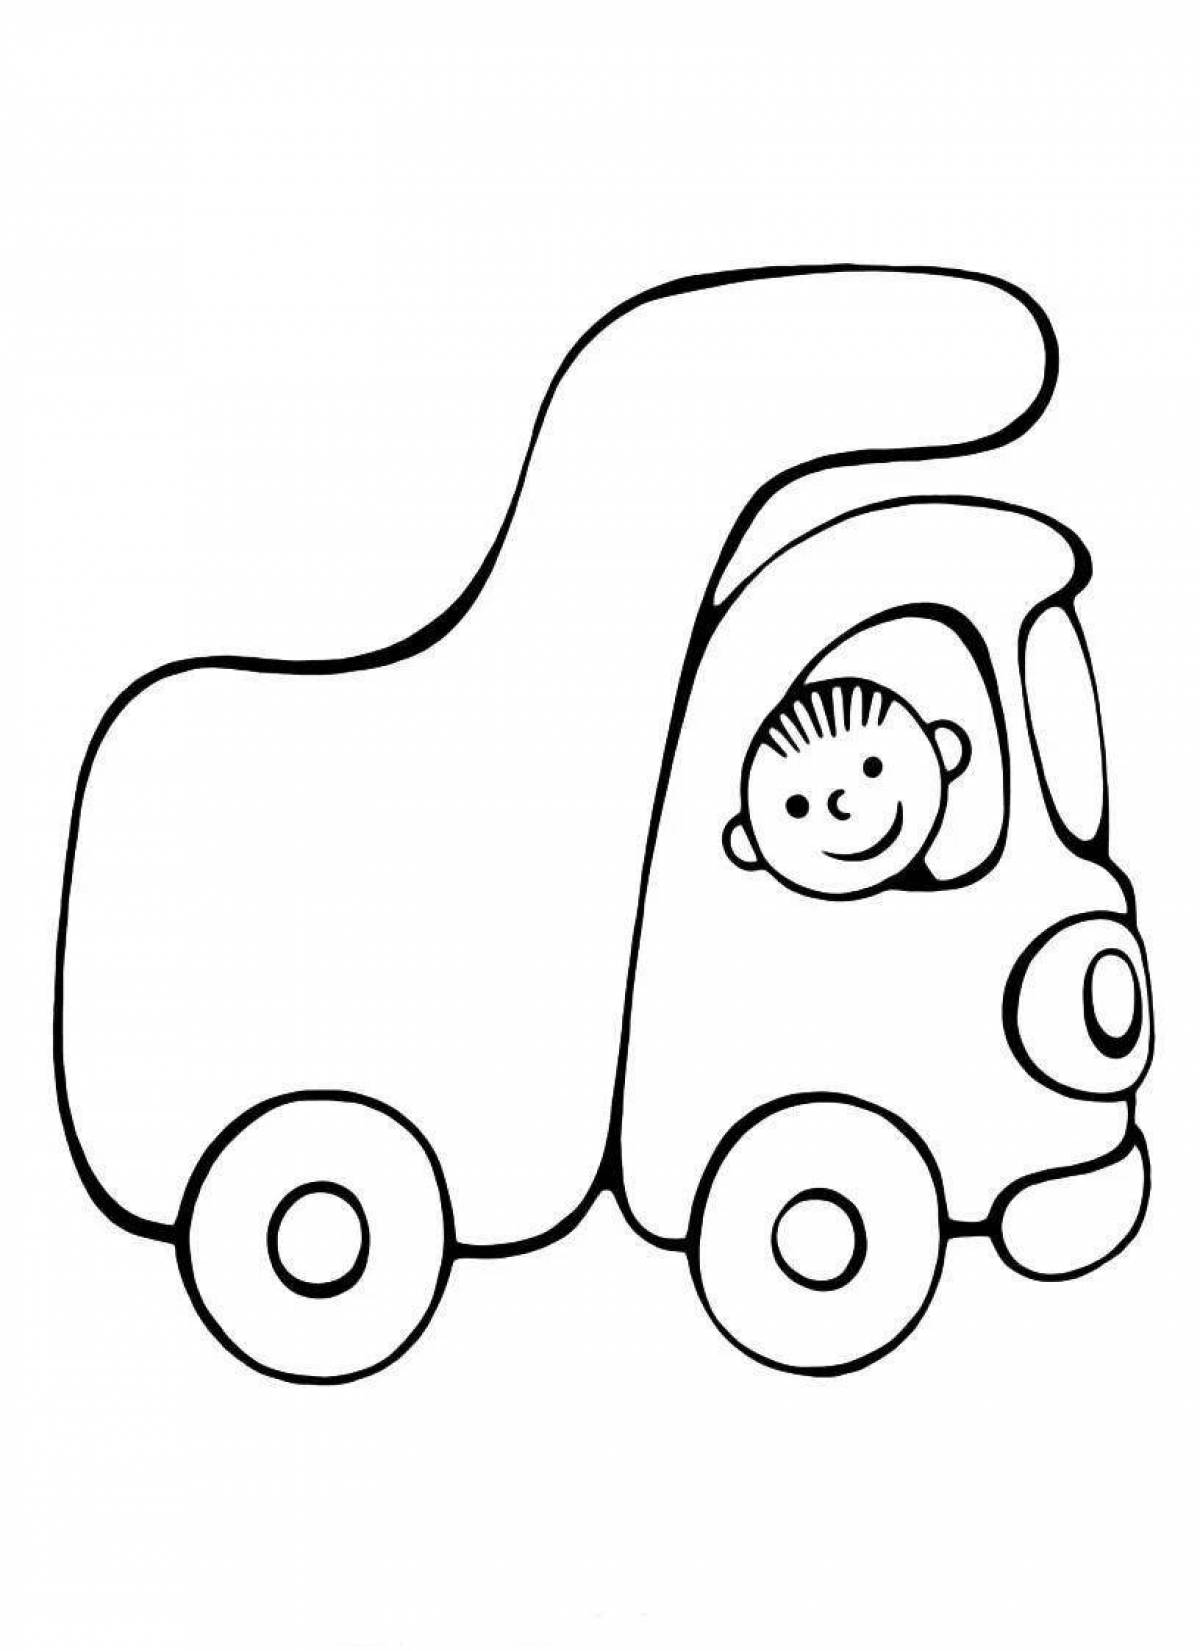 Simple toy car coloring